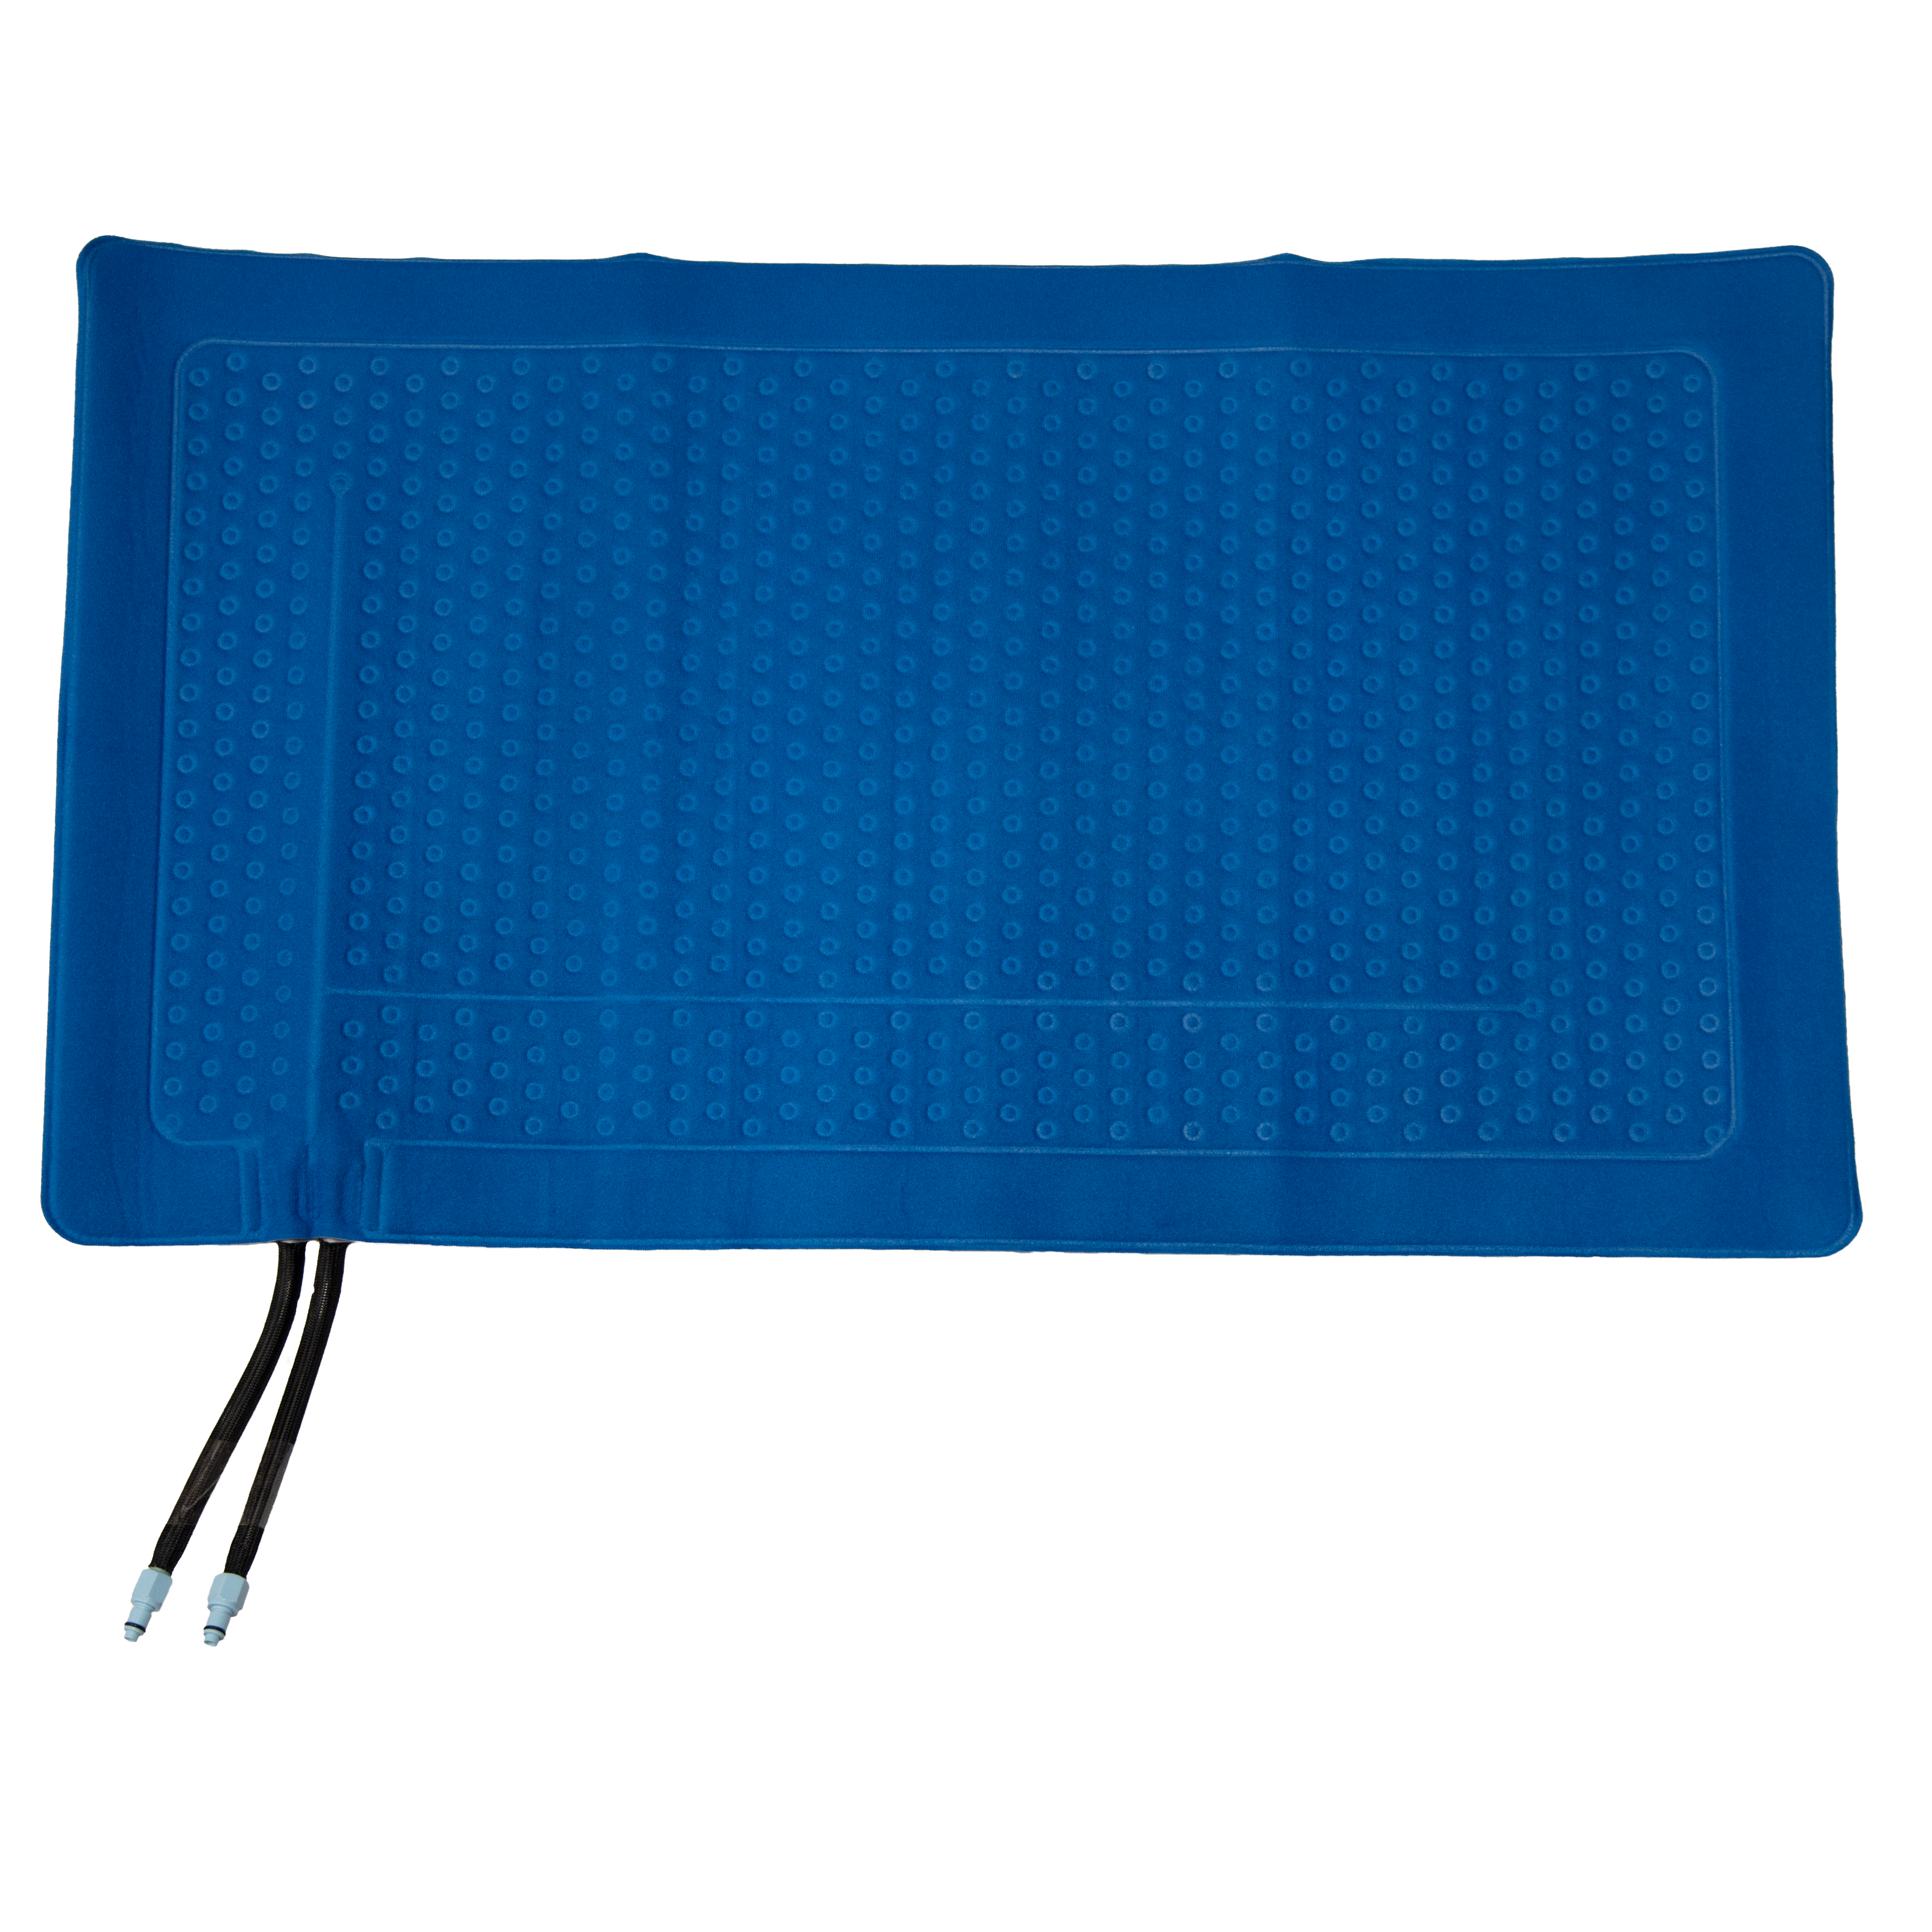 An ice cold cooling water cold pack blanket pad shown